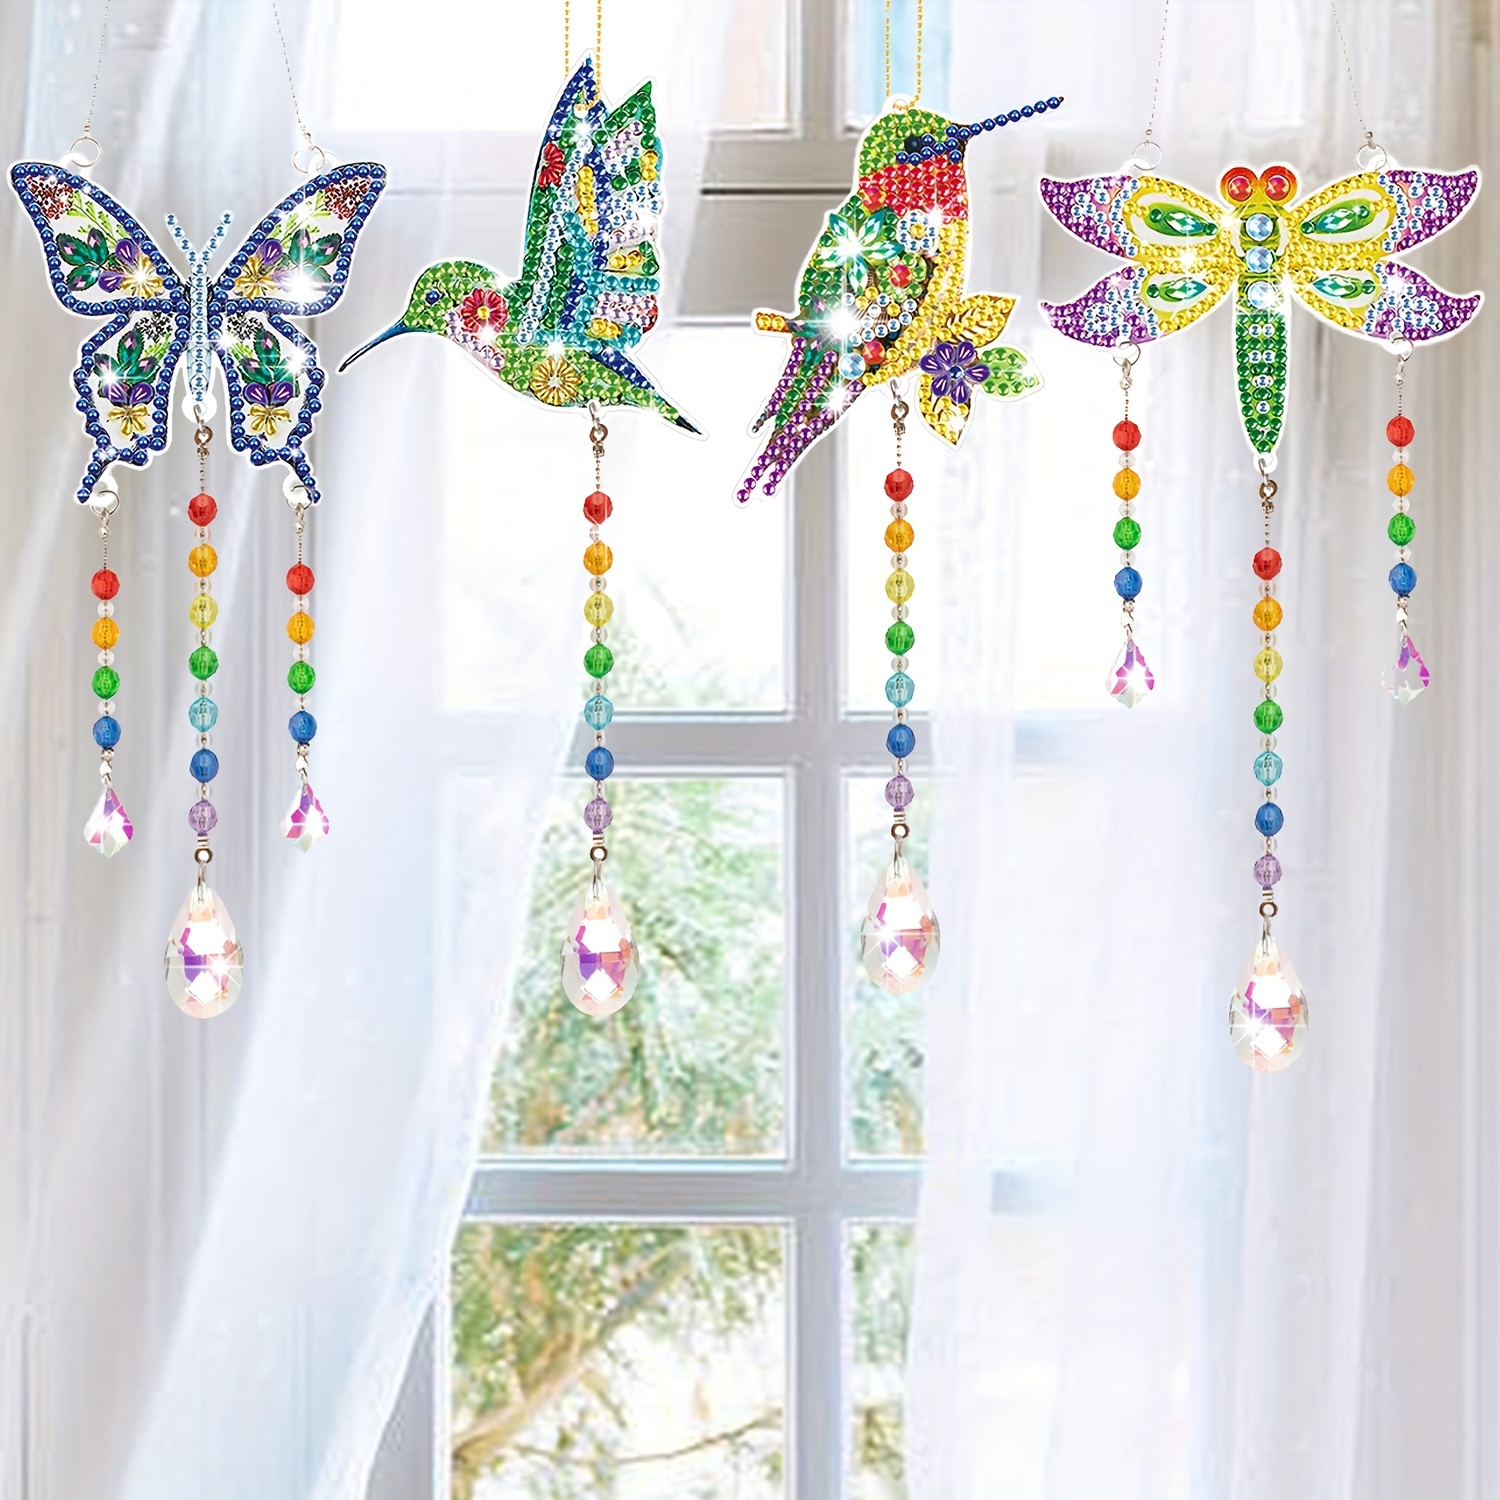  Gift for 6-7-8-9-10 Yeal Old Girls Boys: Arts and Crafts for  Kids Age 6-8-10-12 Diamond Art Wind Chimes Kit for Girl Toys Age 5-11  Present Sun Catcher DIY Paint by